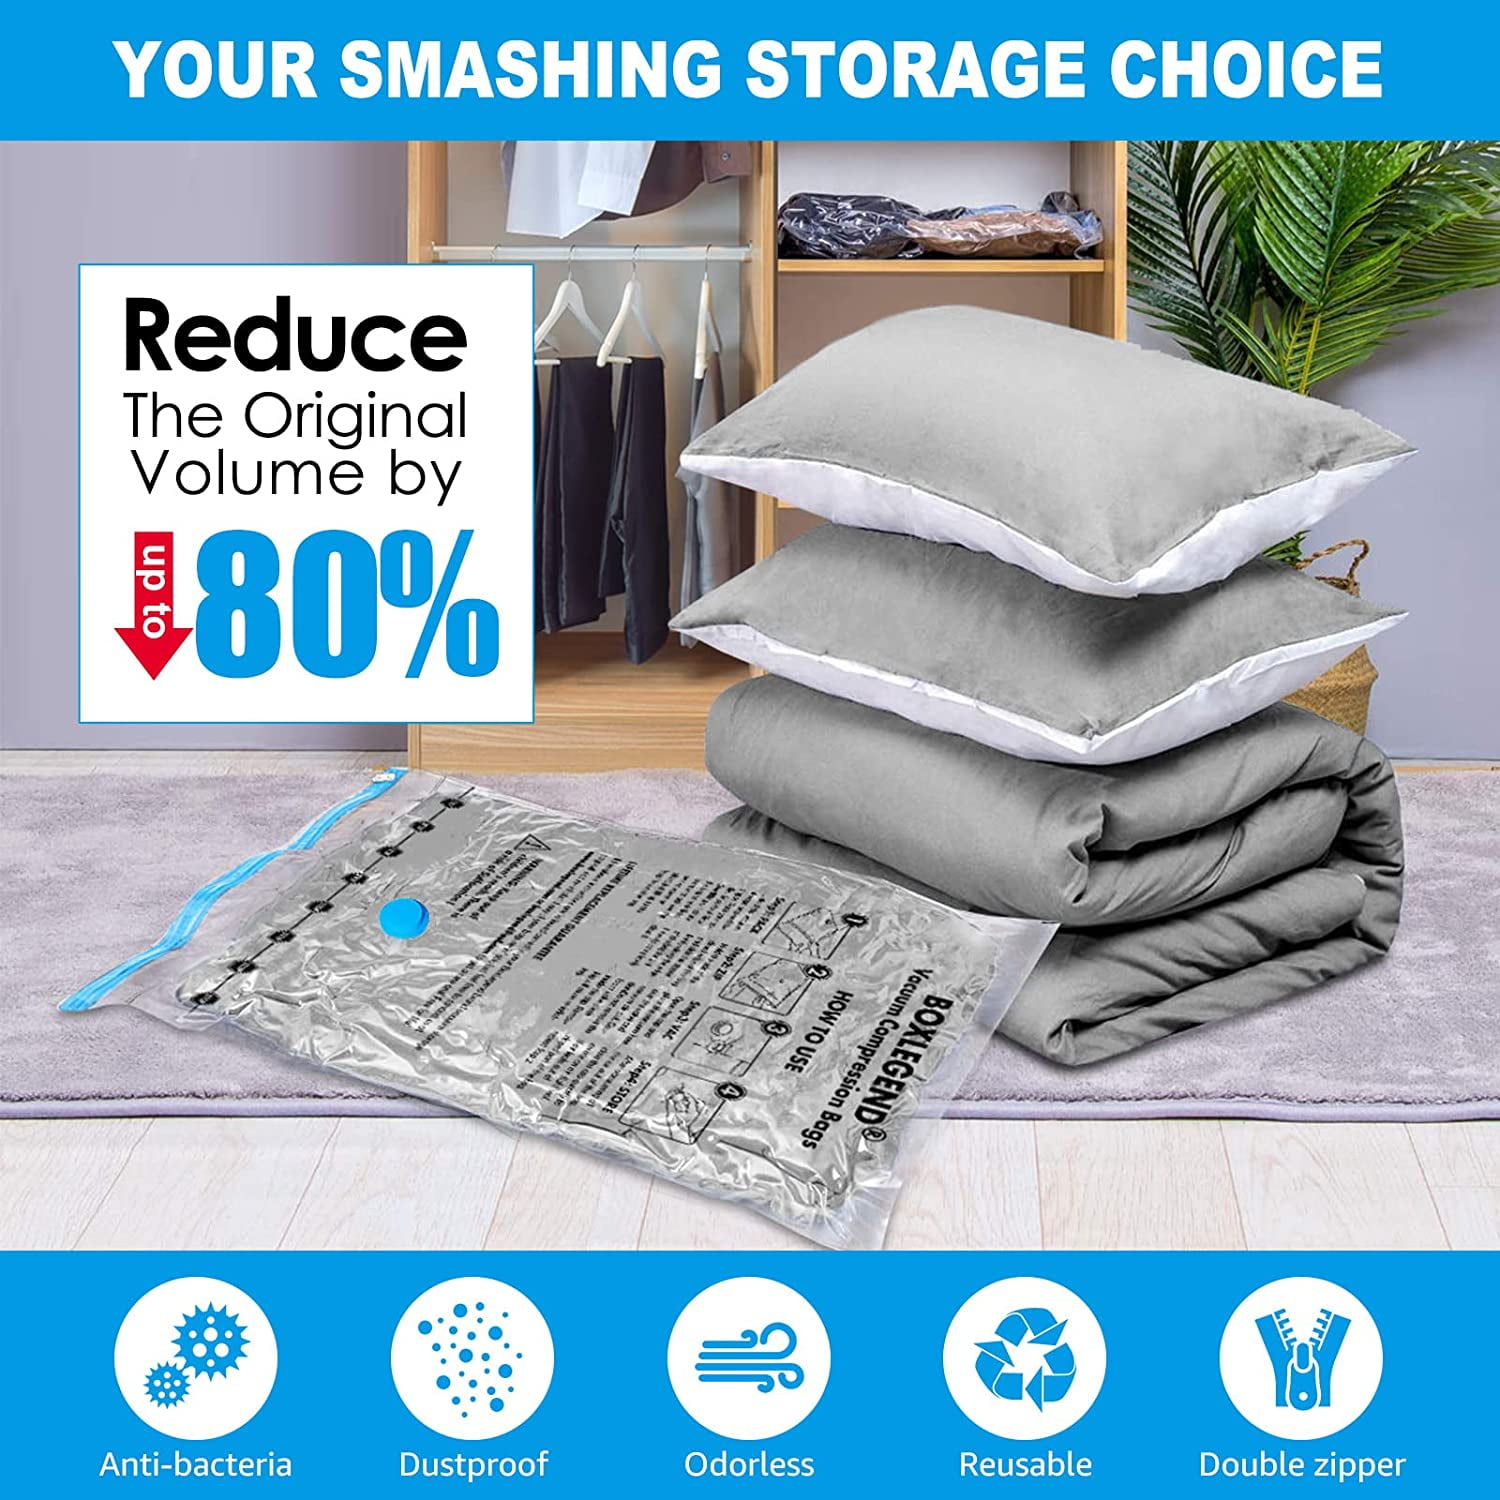 GENIE SPACE - Incredibly Strong Premium Space Saving Vacuum Bags Storage |  Variety 8 Pack (2XL+2L+2M+2S) | Airtight & Reusable | Create 80% more space